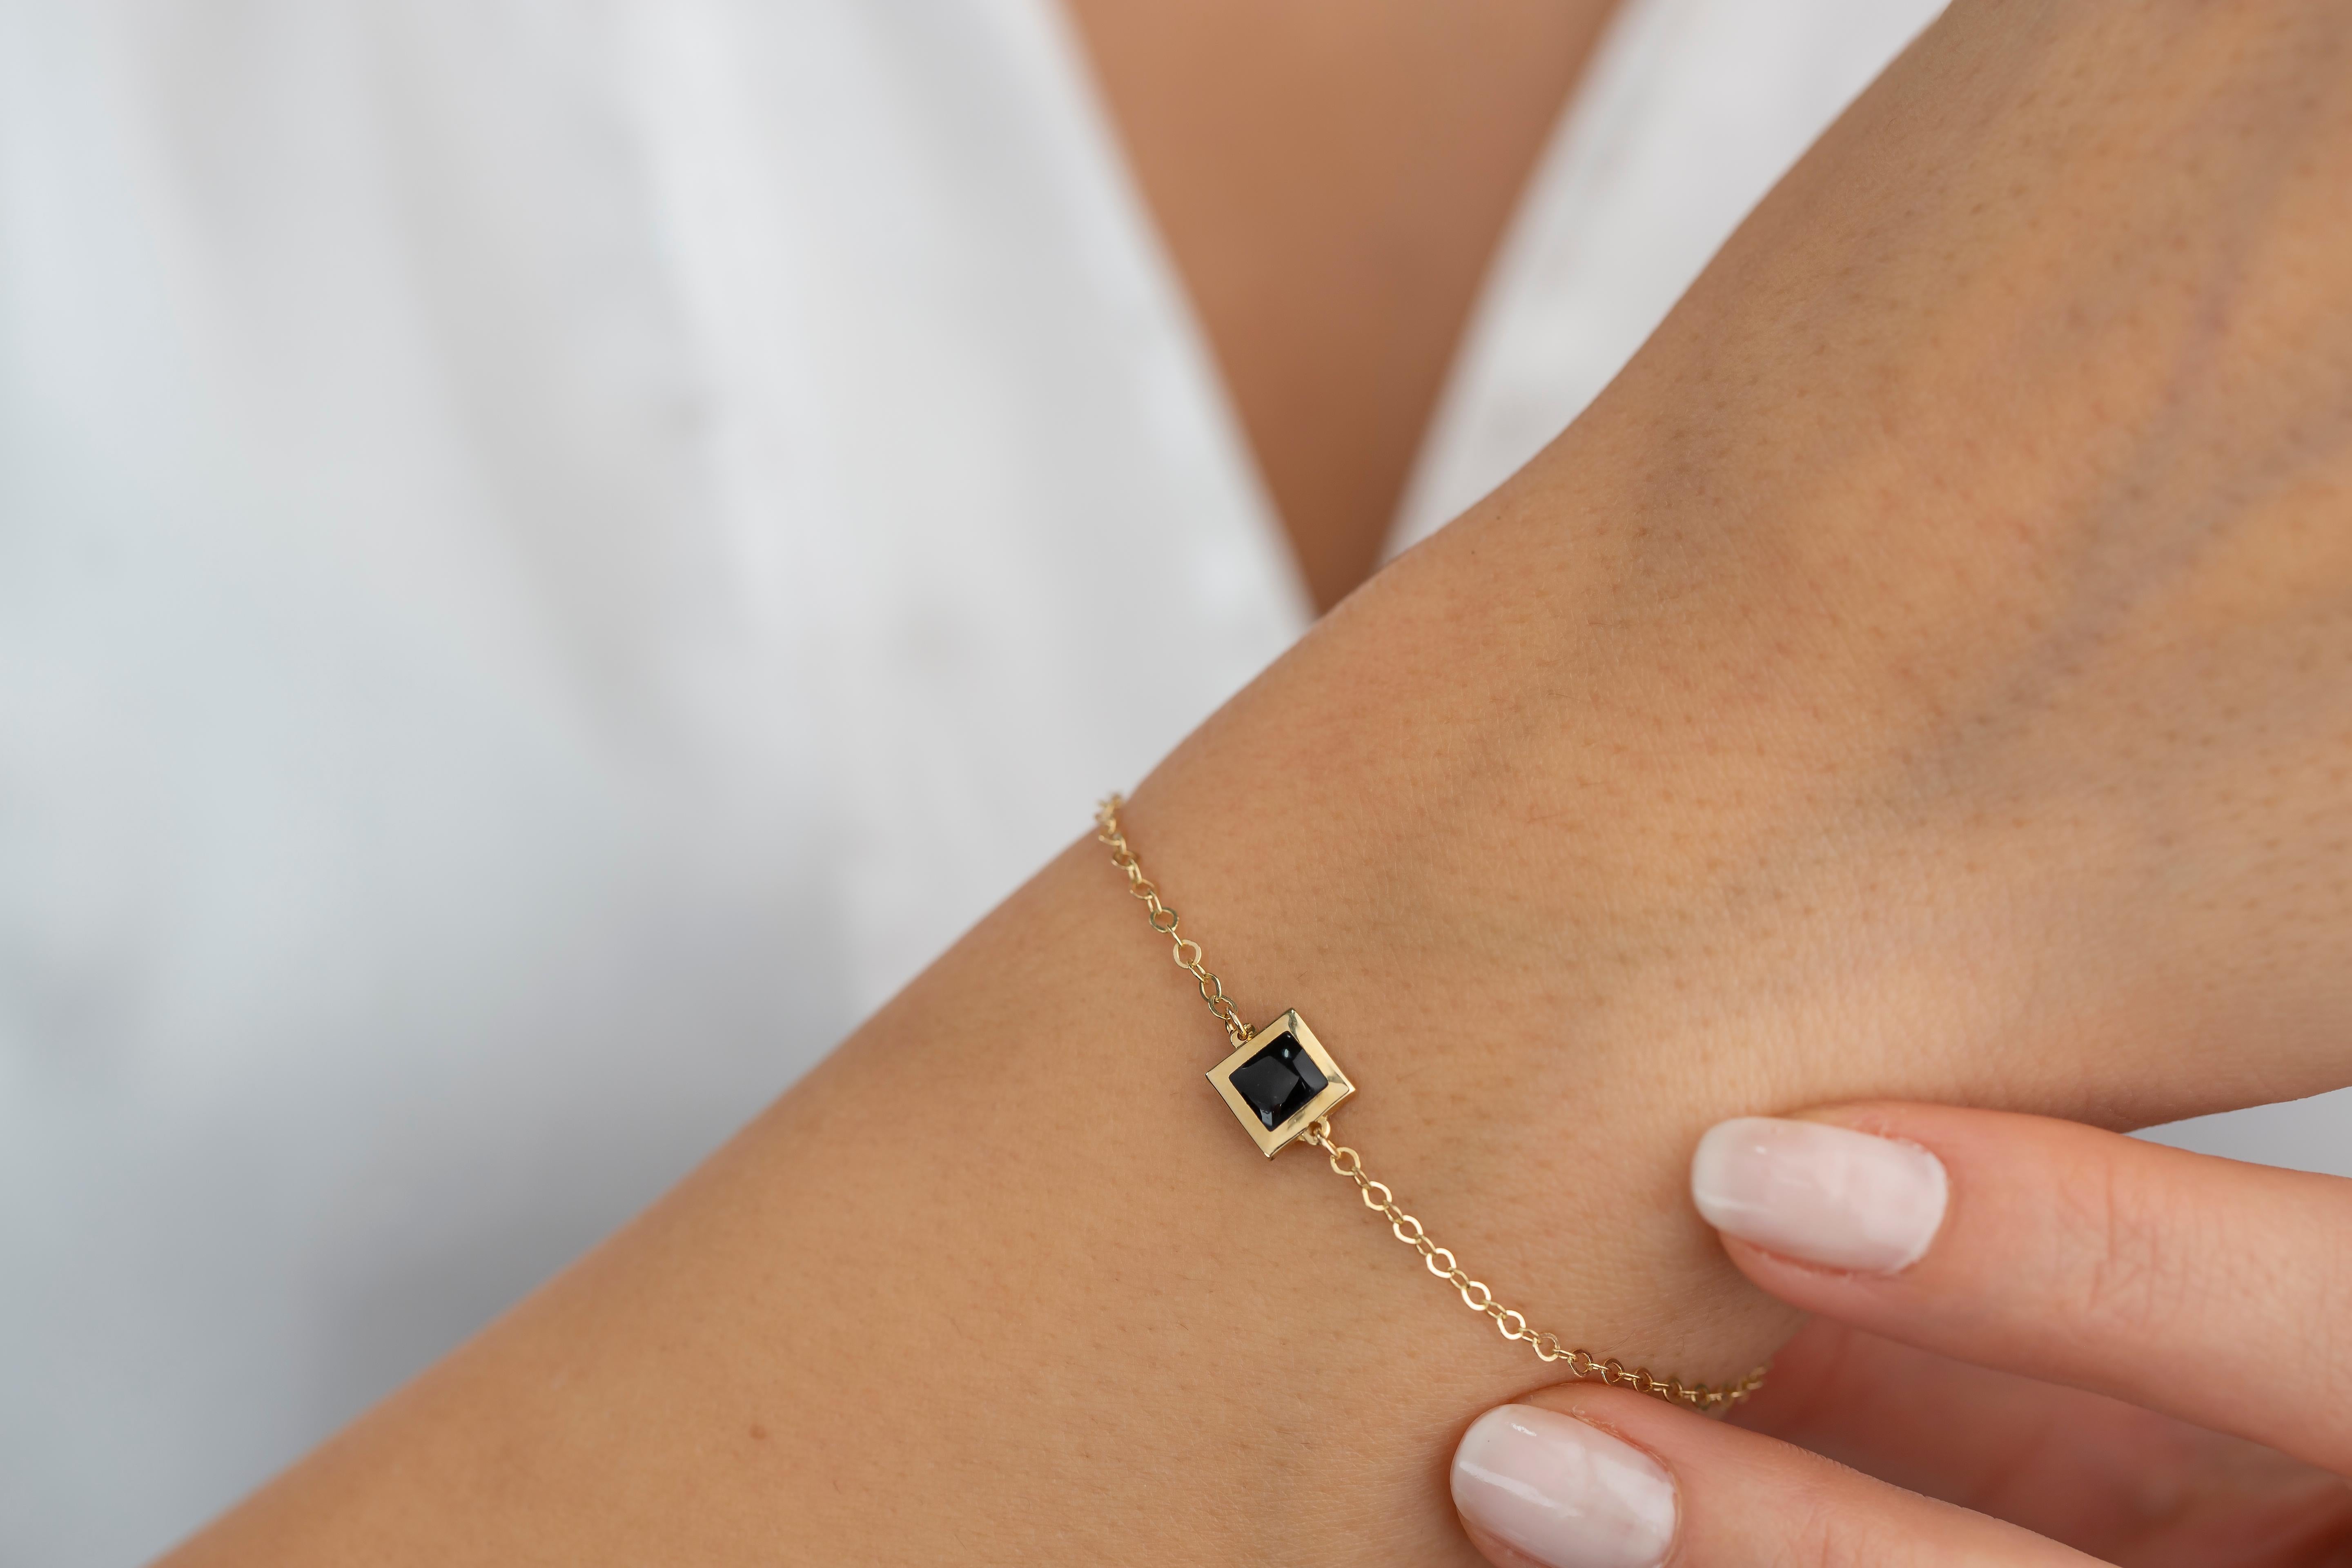 14K Gold Black Enameled Square Shaped Charm Dainty Bracelet
Made of 14 ct. solid gold.
With hallmark.

Total Weight: 1,2 gr.
Size: 18.0 cm

This piece was made with quality materials and excellent handwork. I guarantee the quality assurance of my